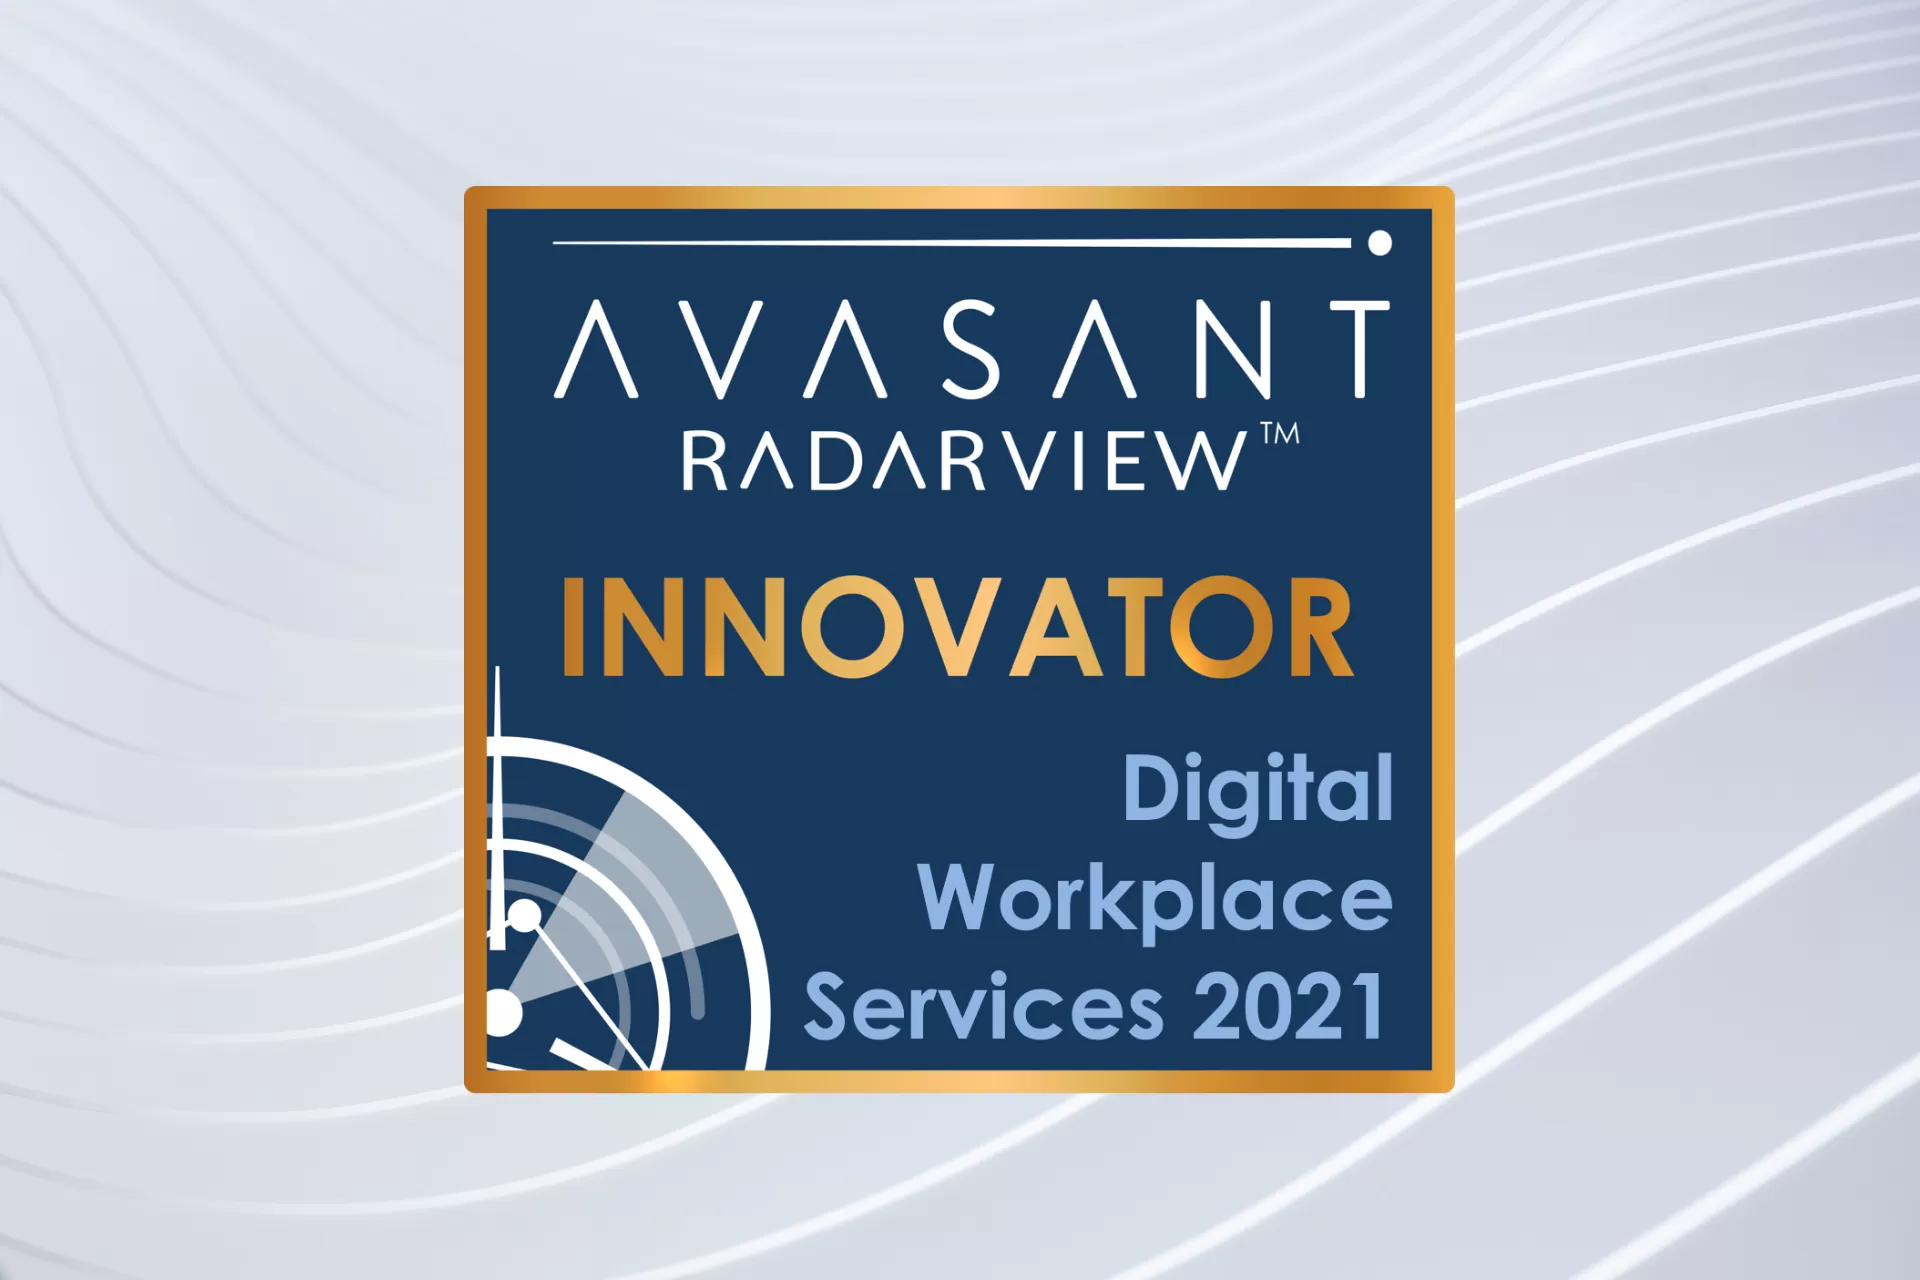 Zensar has been mentioned as “Innovator” in Avasant's Digital Workplace Services 2021 RadarView™ report